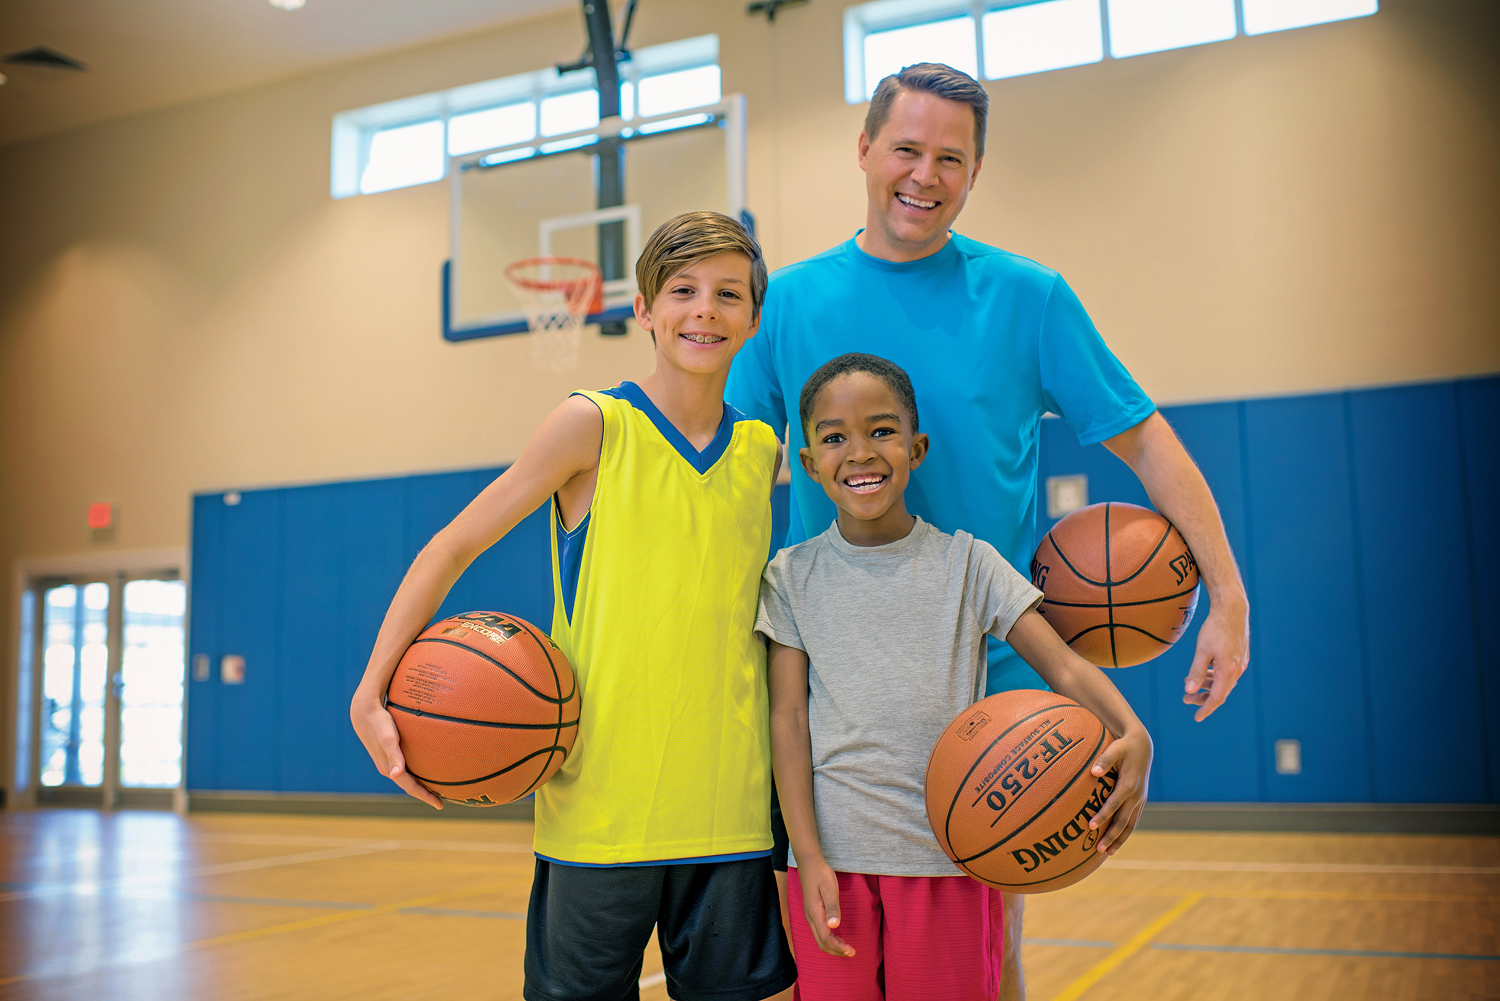 A man and two boys with basketballs smiling and posing for camera.